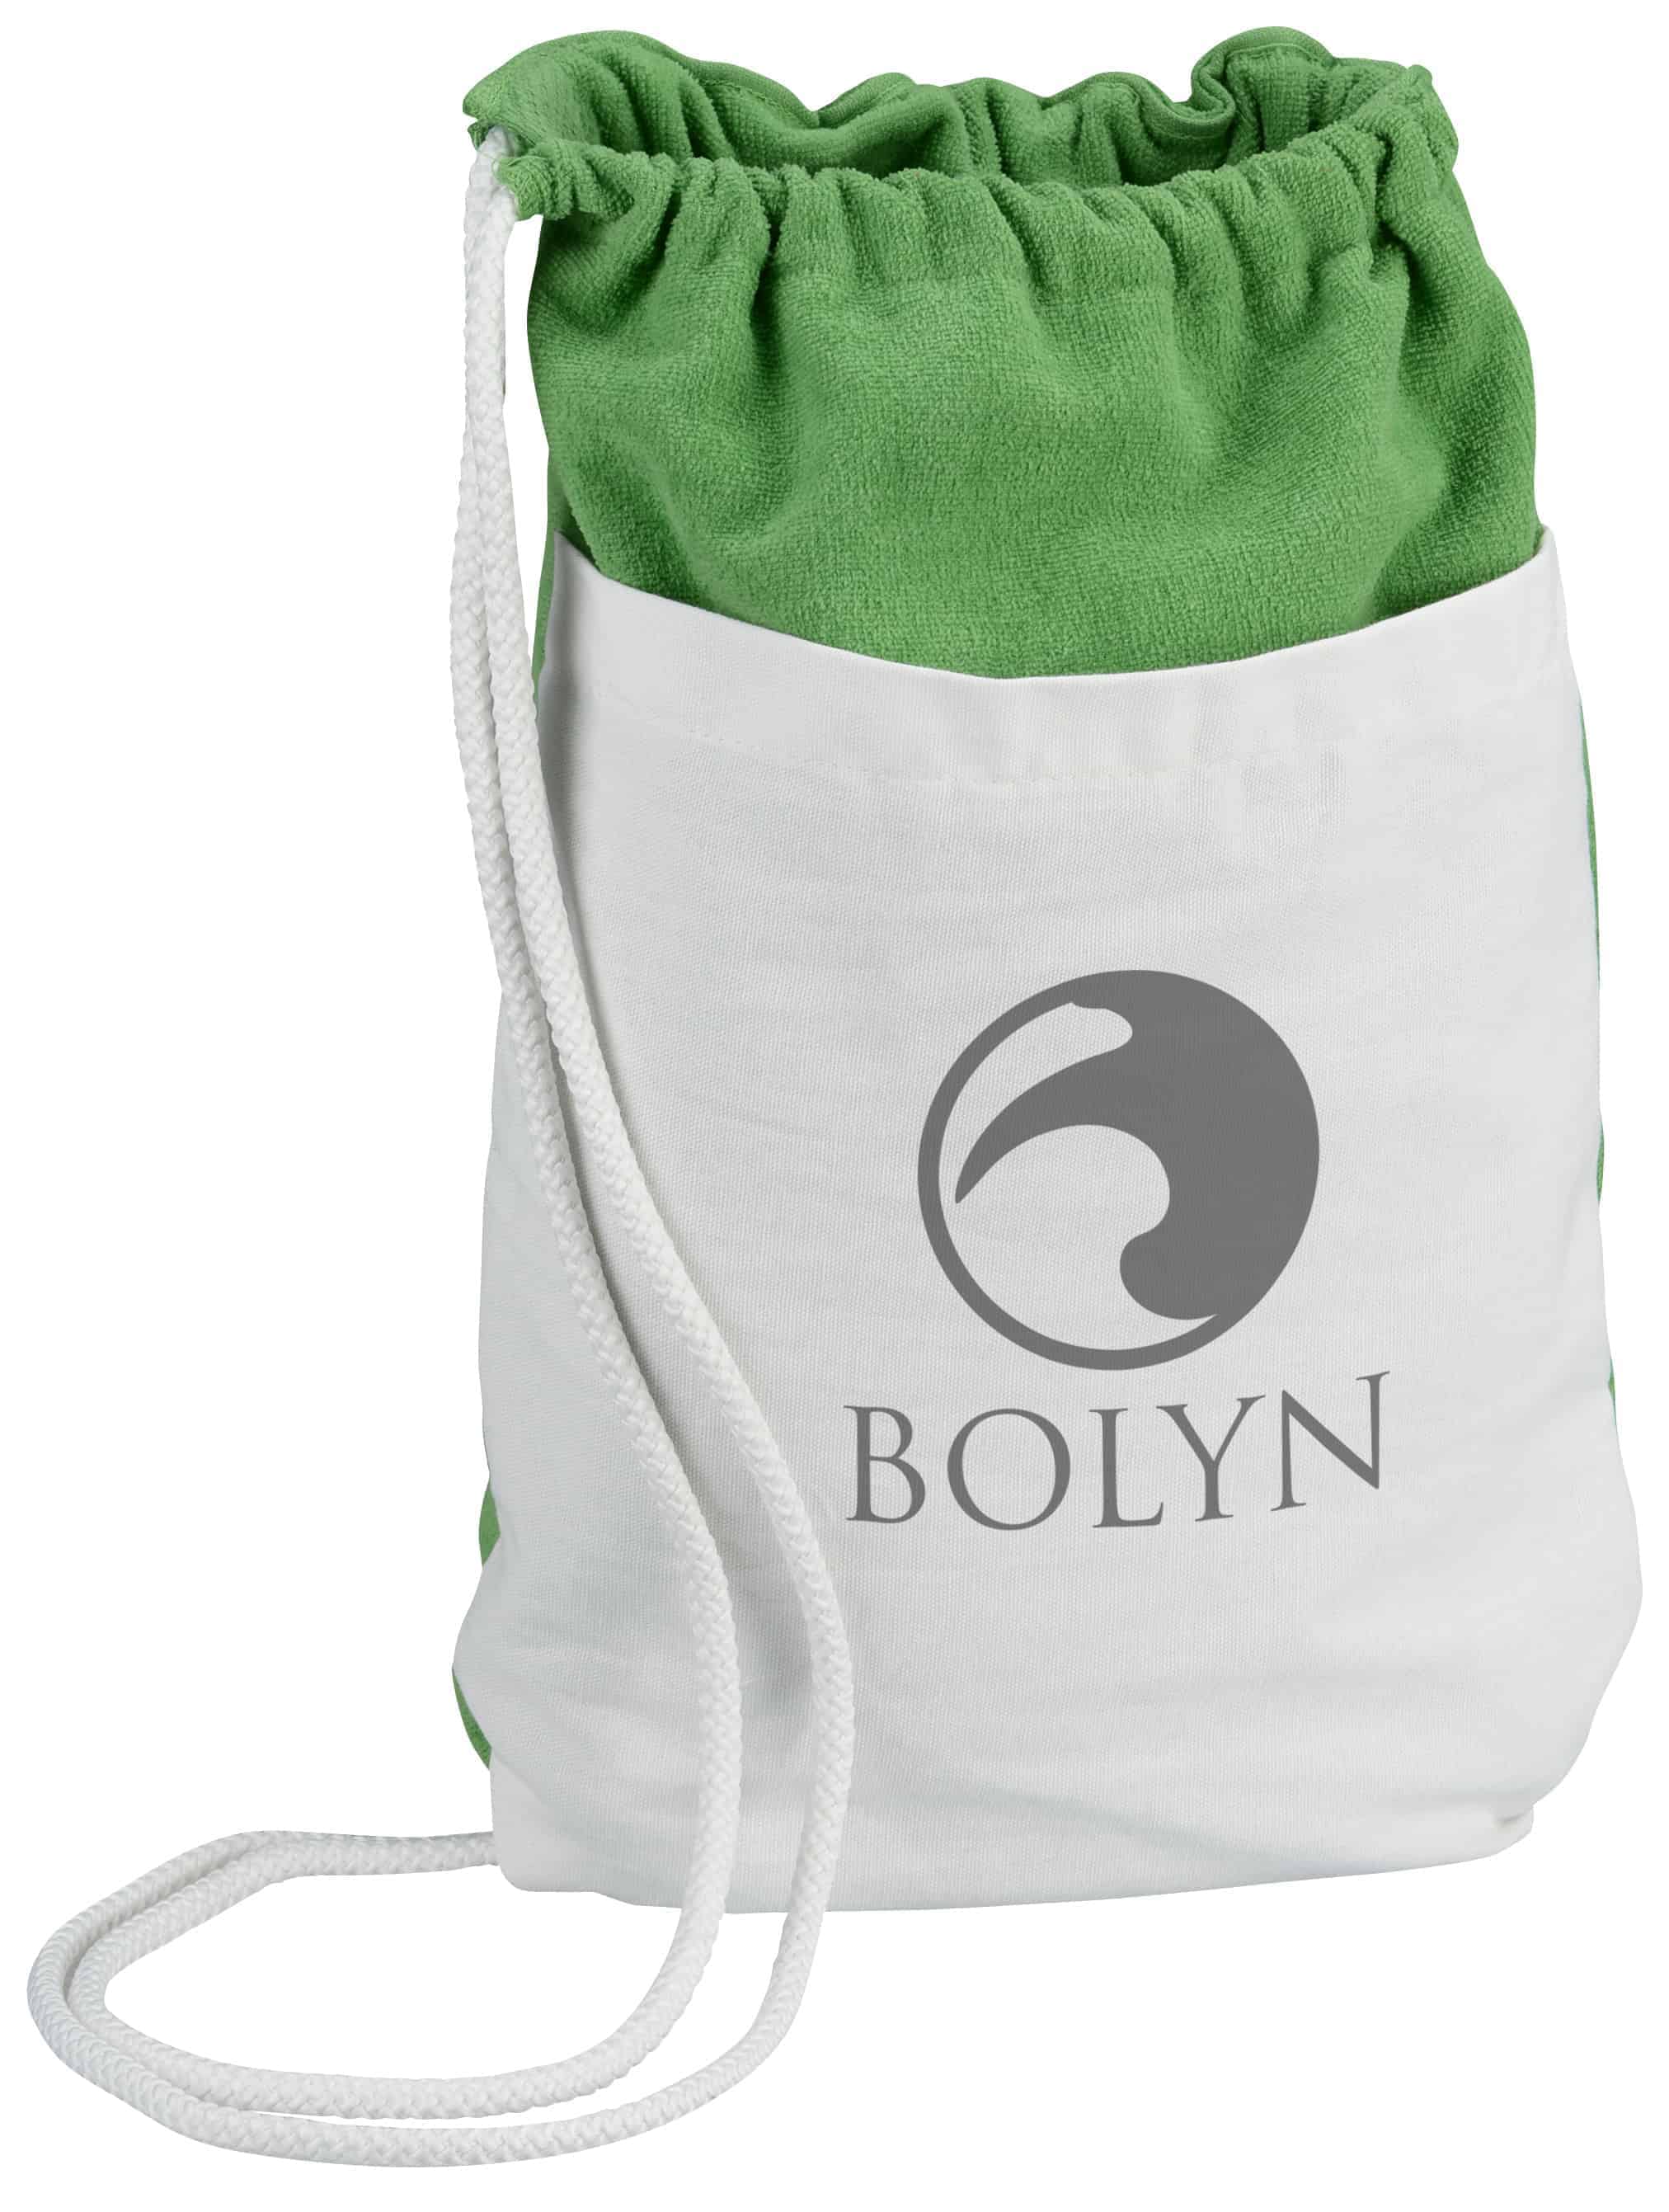 A 100% cotton Stowaway Tote N Towel.